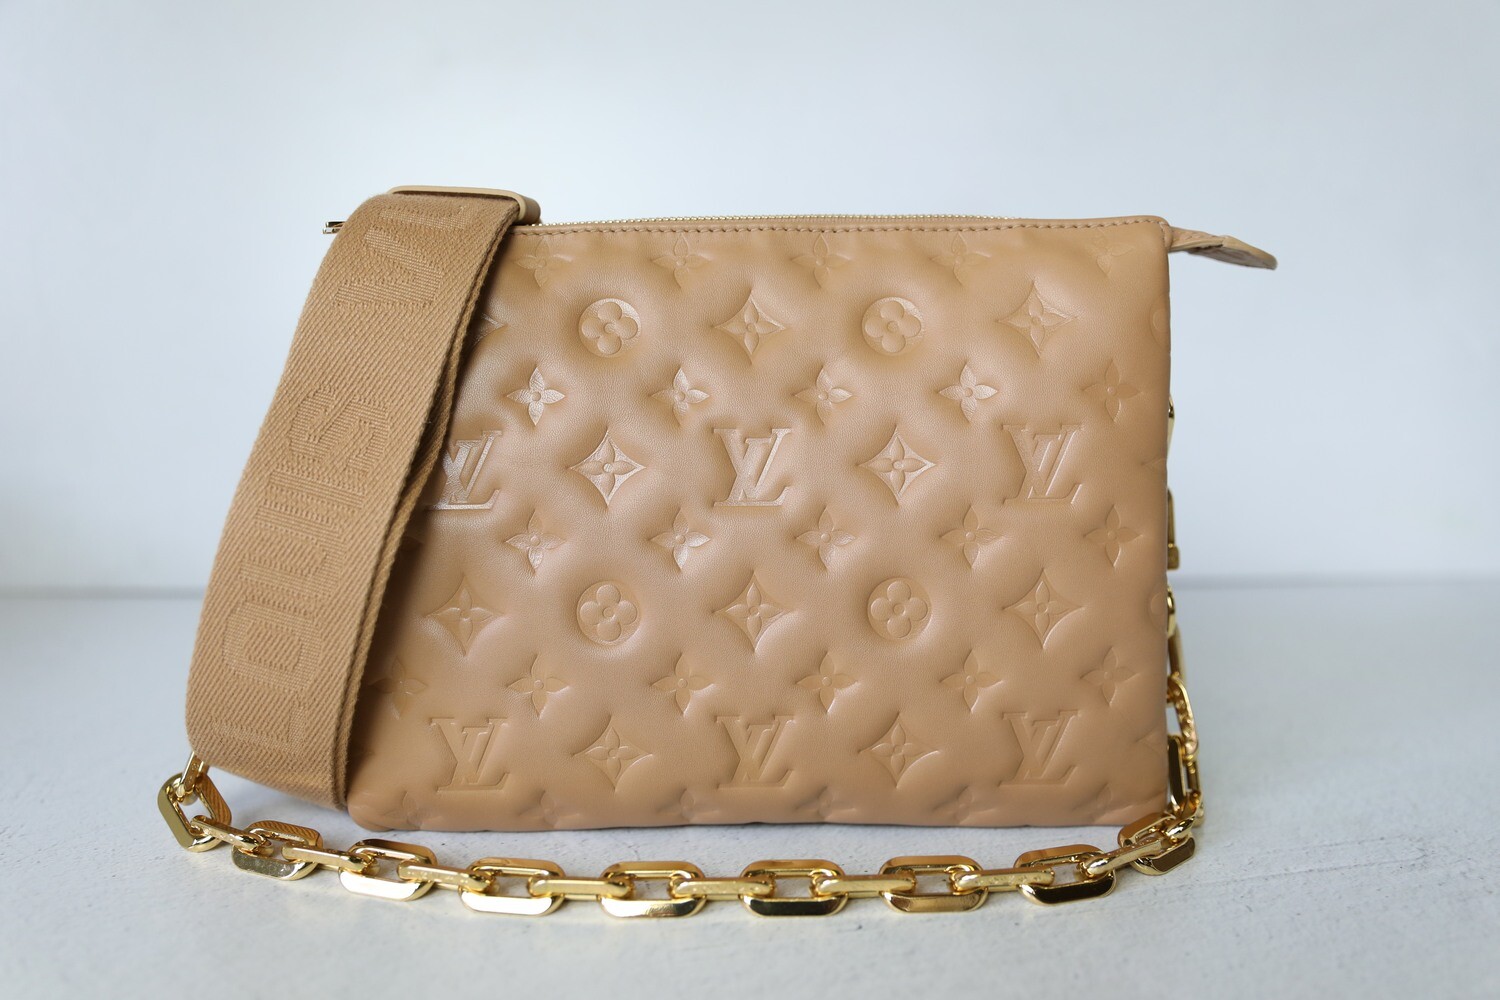 Louis Vuitton Coussin PM, Taupe, Preowned in Box WA001 - Julia